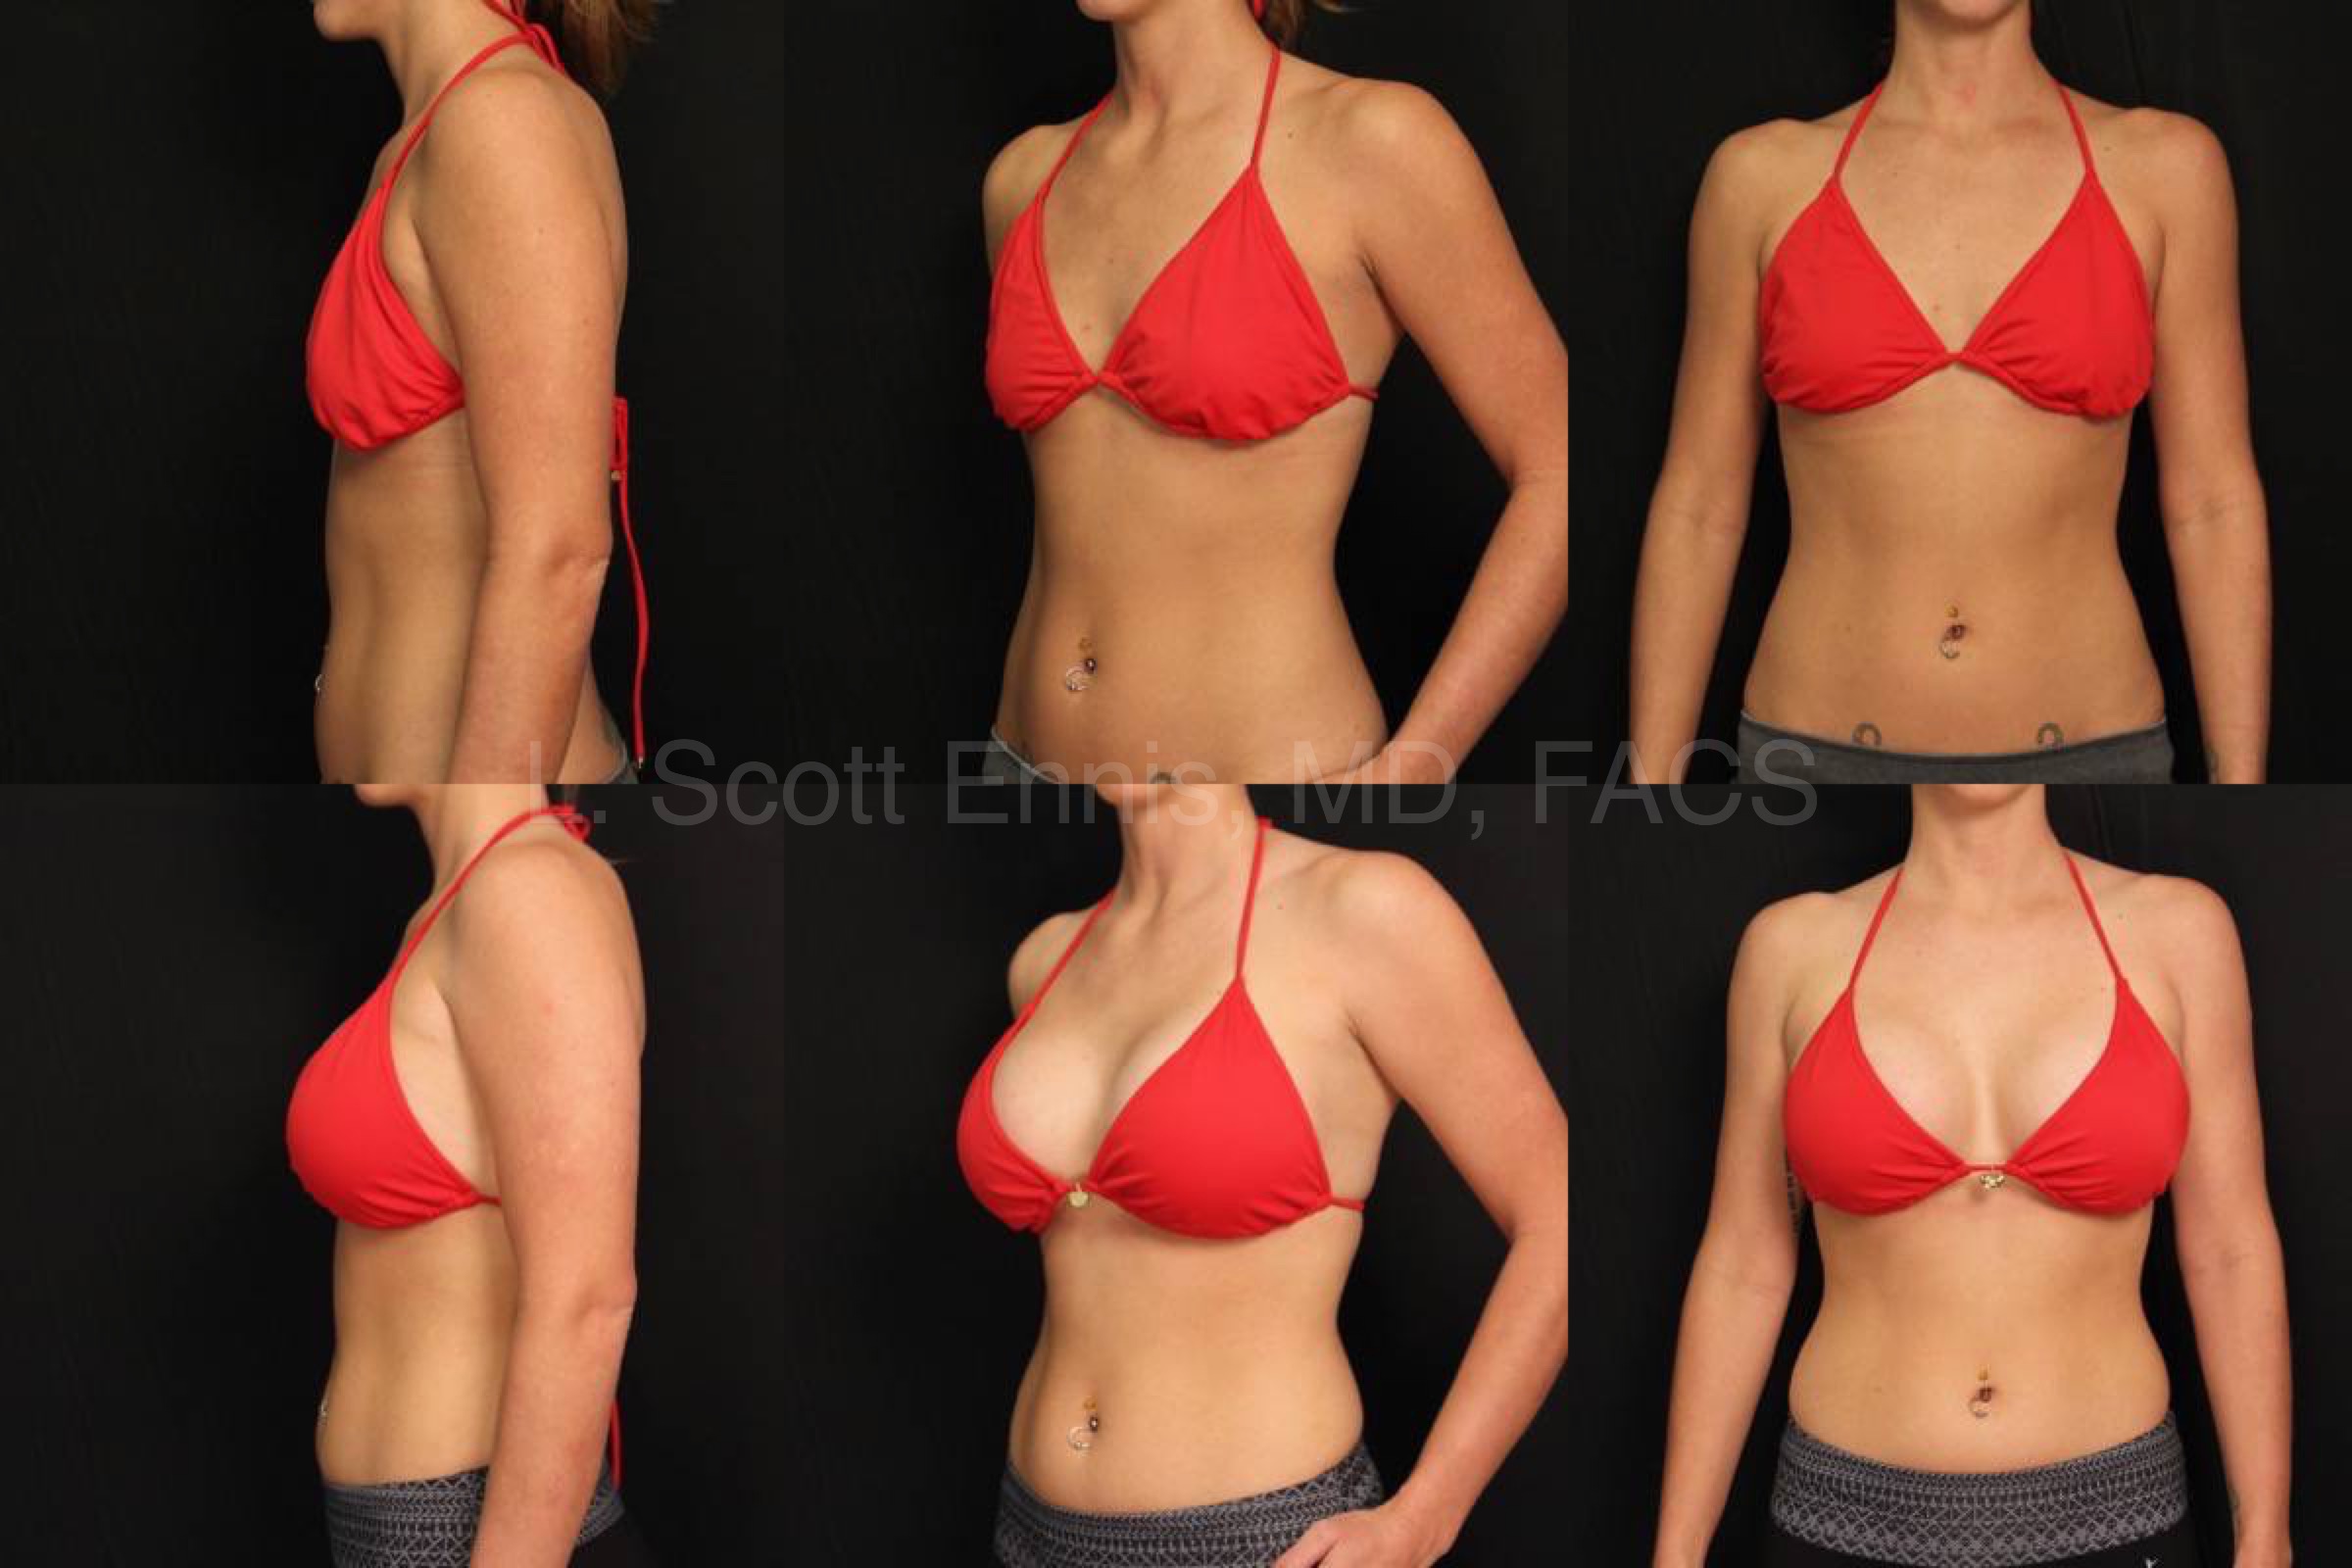 Breast Augmentation Endo Sientra HP Gel R595  L545 29 5 10  145 A To D Before And After Ennis Plastic Surgery Palm Beach Boca Raton Destin Miami 37388 Covered 